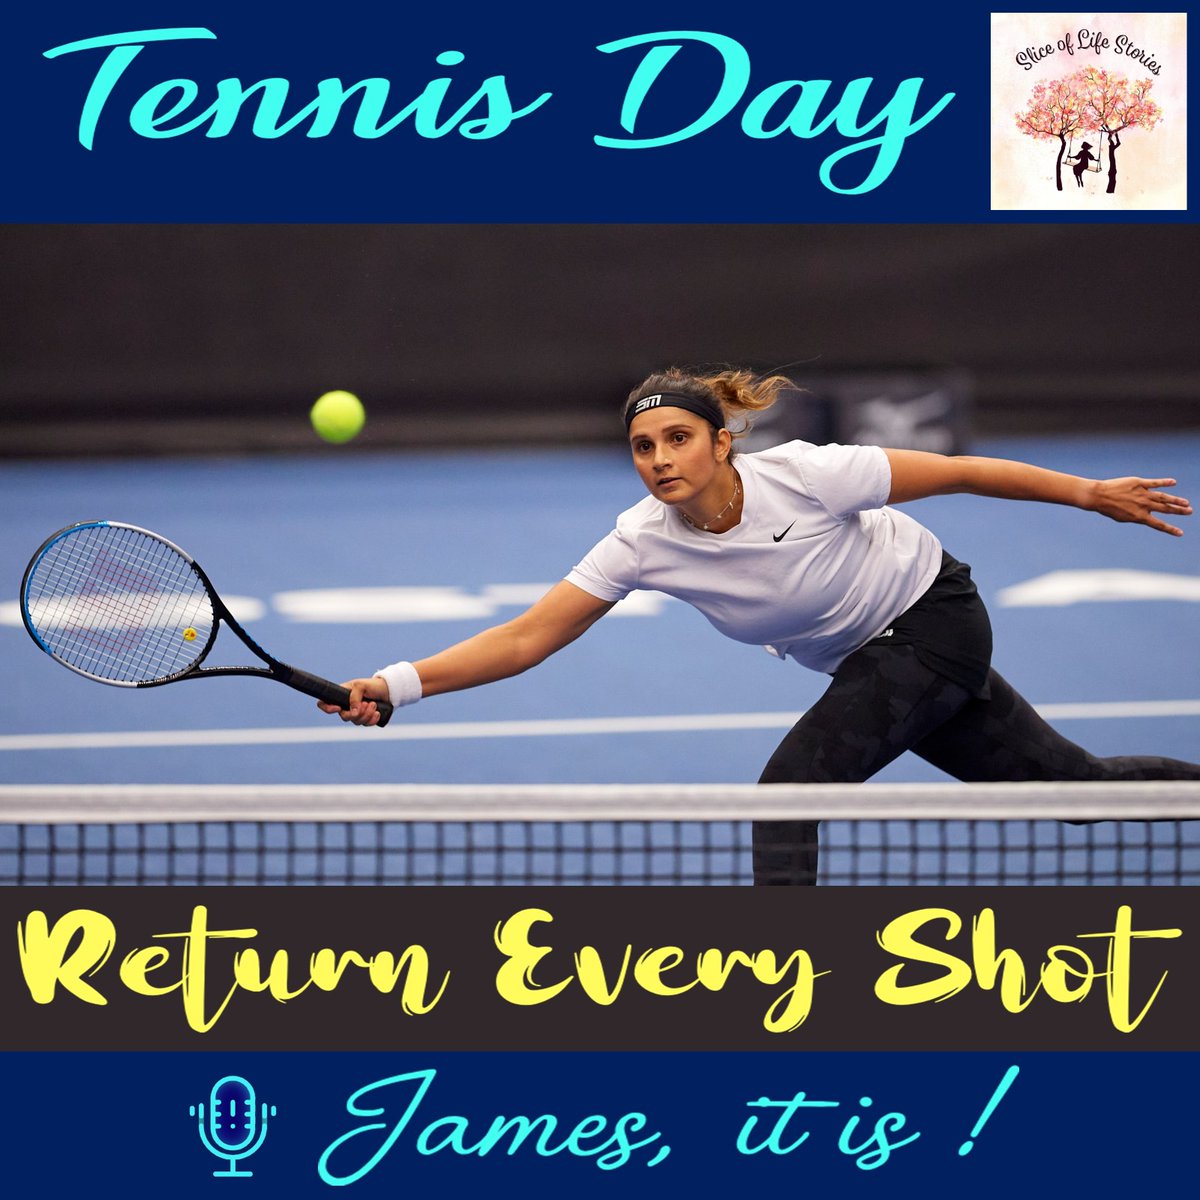 #TennisDay with🎙James, it is!

▶ youtu.be/v-lXBNlAESo

#summerholidays #tennis #sport #oldlibrary #ancientrooms #excitement #favouritehangout #strikingapose #playingcoy #highwalls #metalroof #missingphone #helpless #madthoughts #exhaustion #fear #pouringrain #confusion #sols